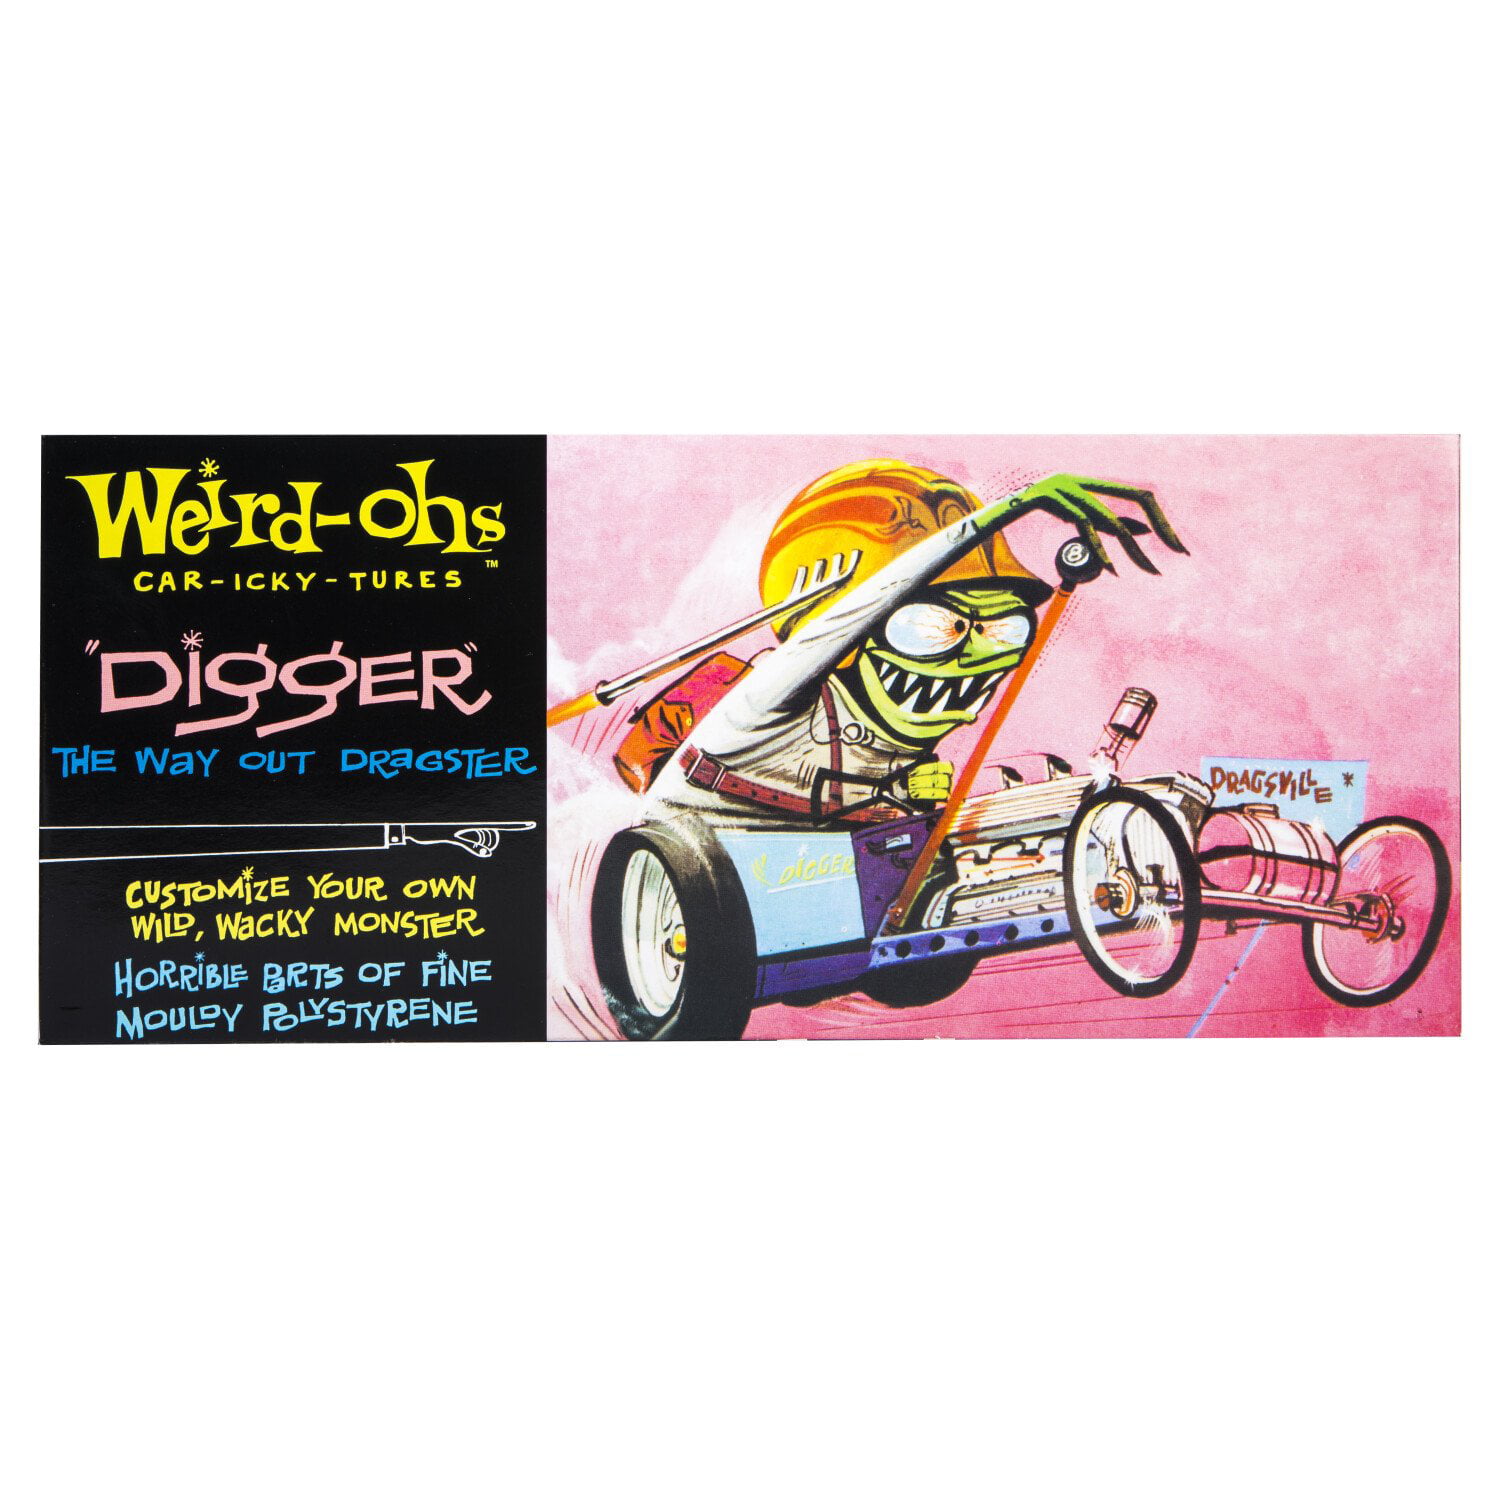 2006 HAWK Weird-ohs Digger The Way out Dragster Factory Plastic Model Kit for sale online 